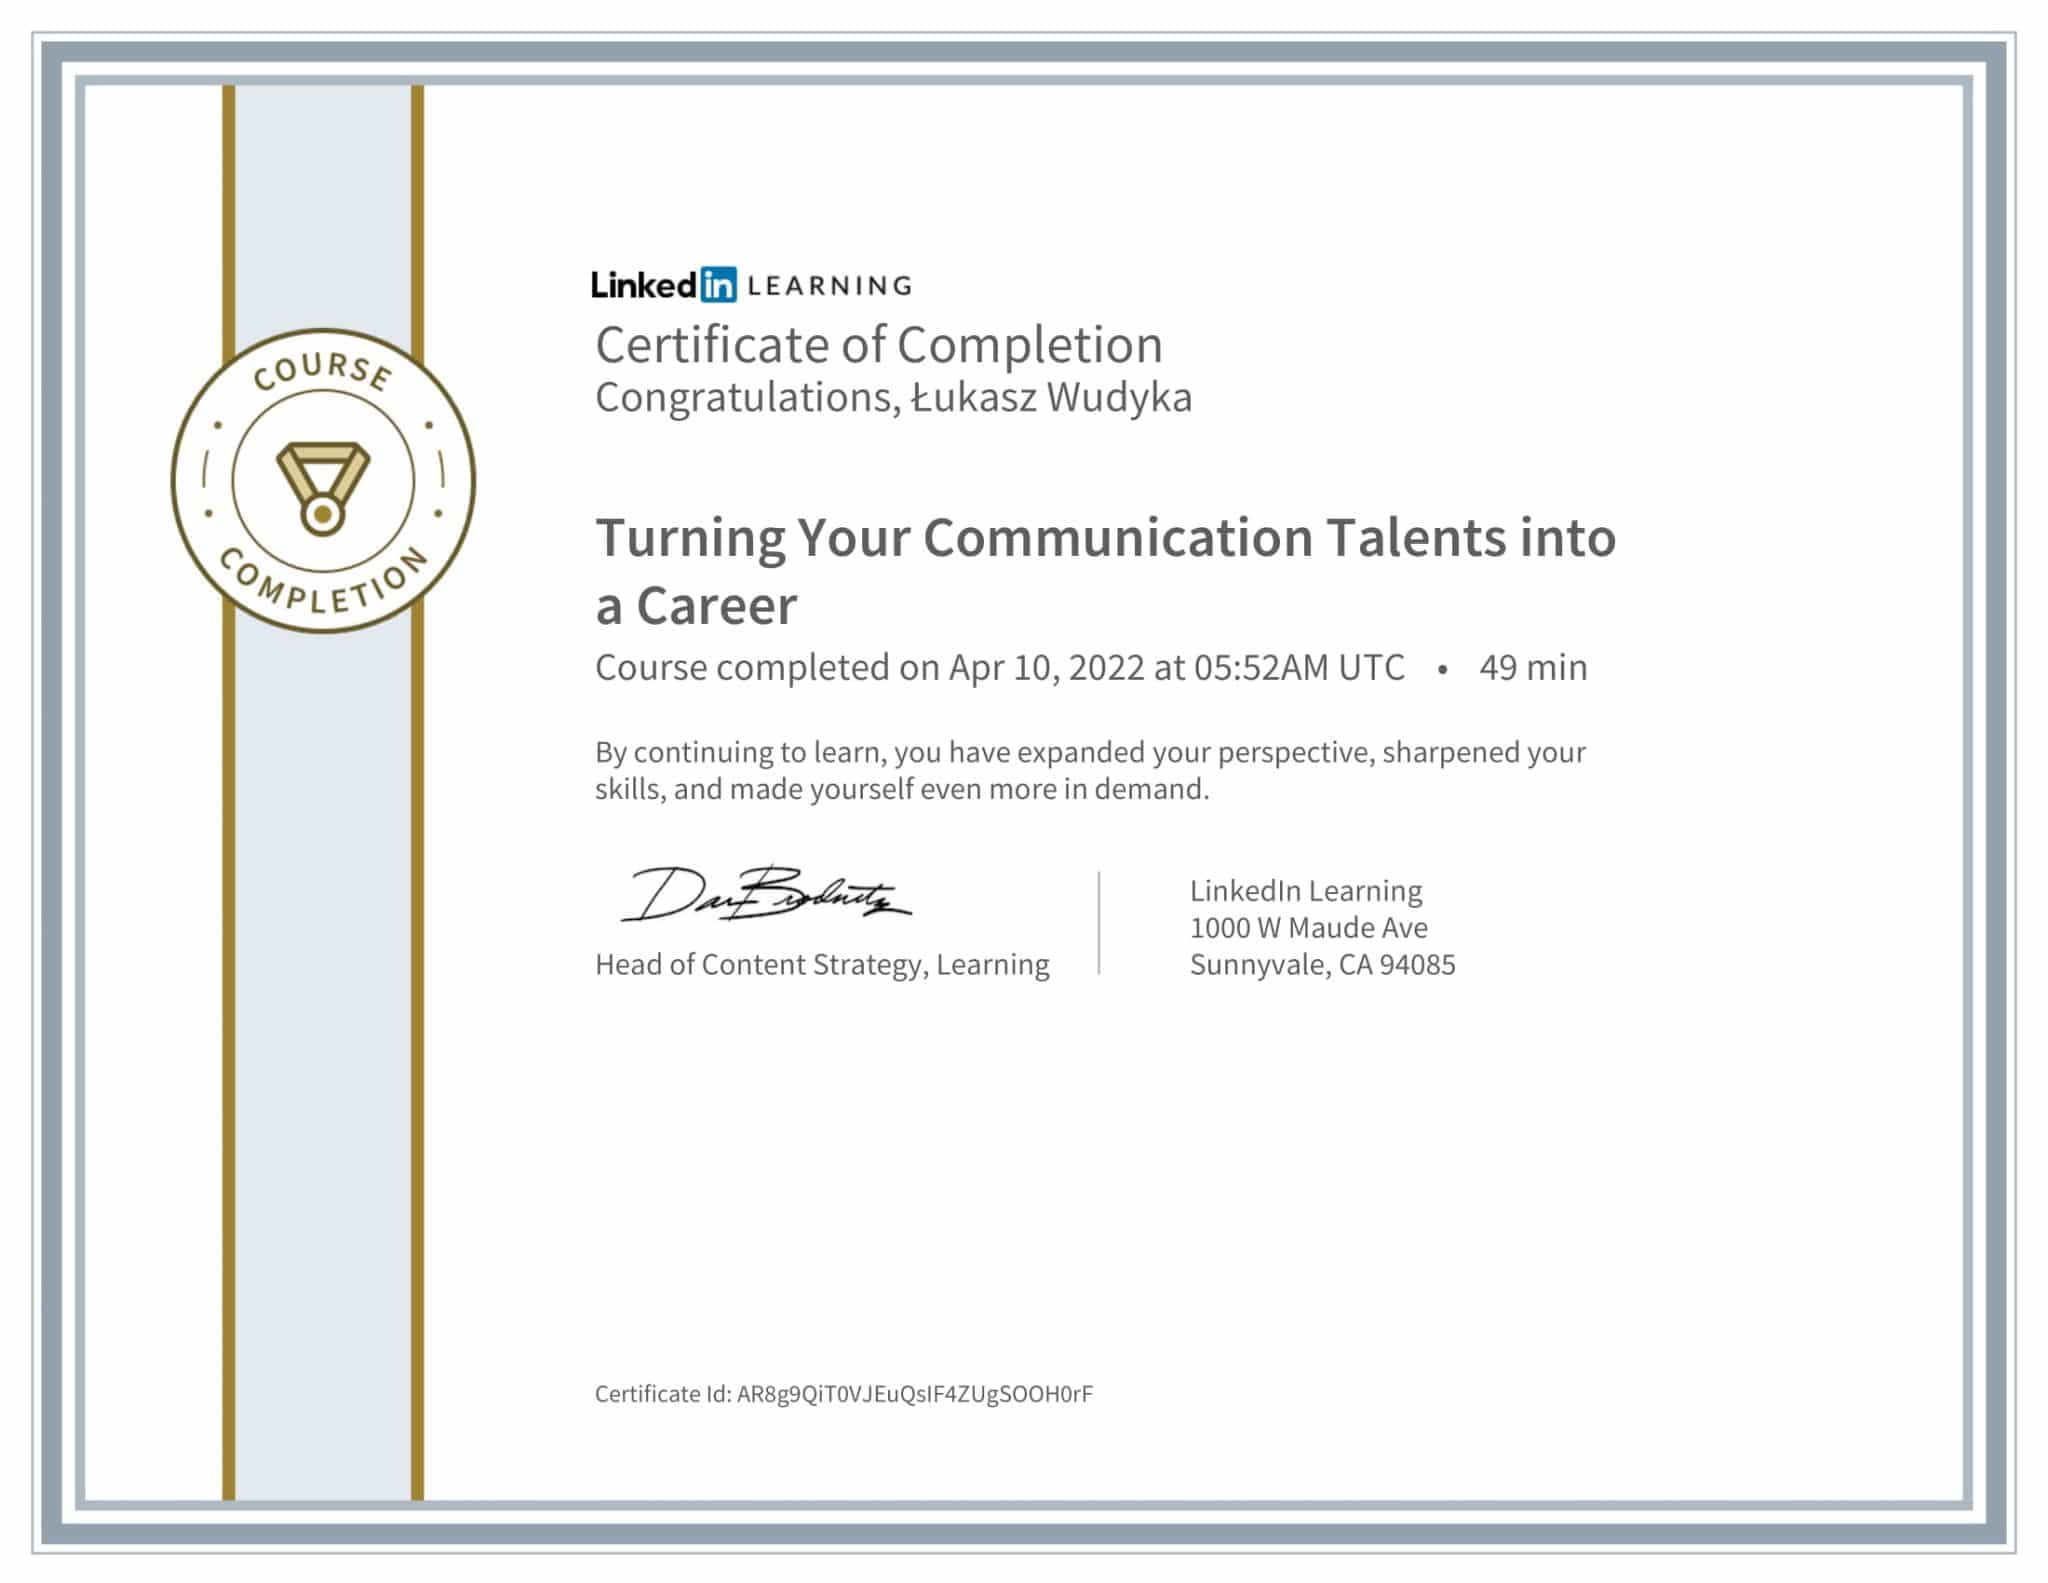 CertificateOfCompletion_Turning Your Communication Talents into a Career-1